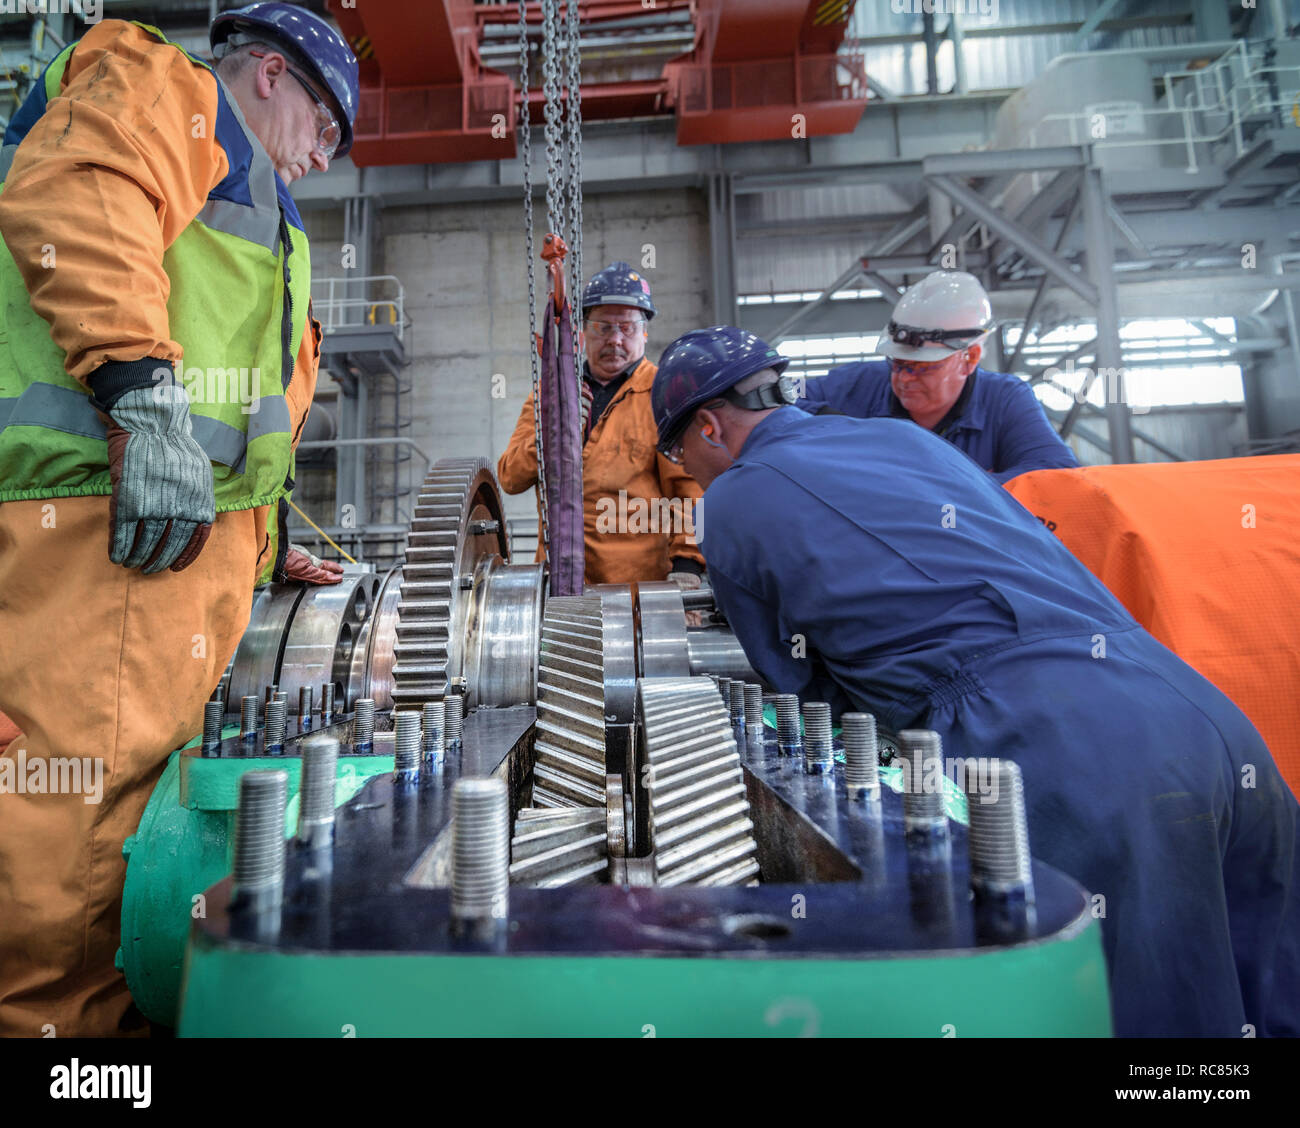 Engineers craning large gear into place in turbine hall of nuclear power station Stock Photo